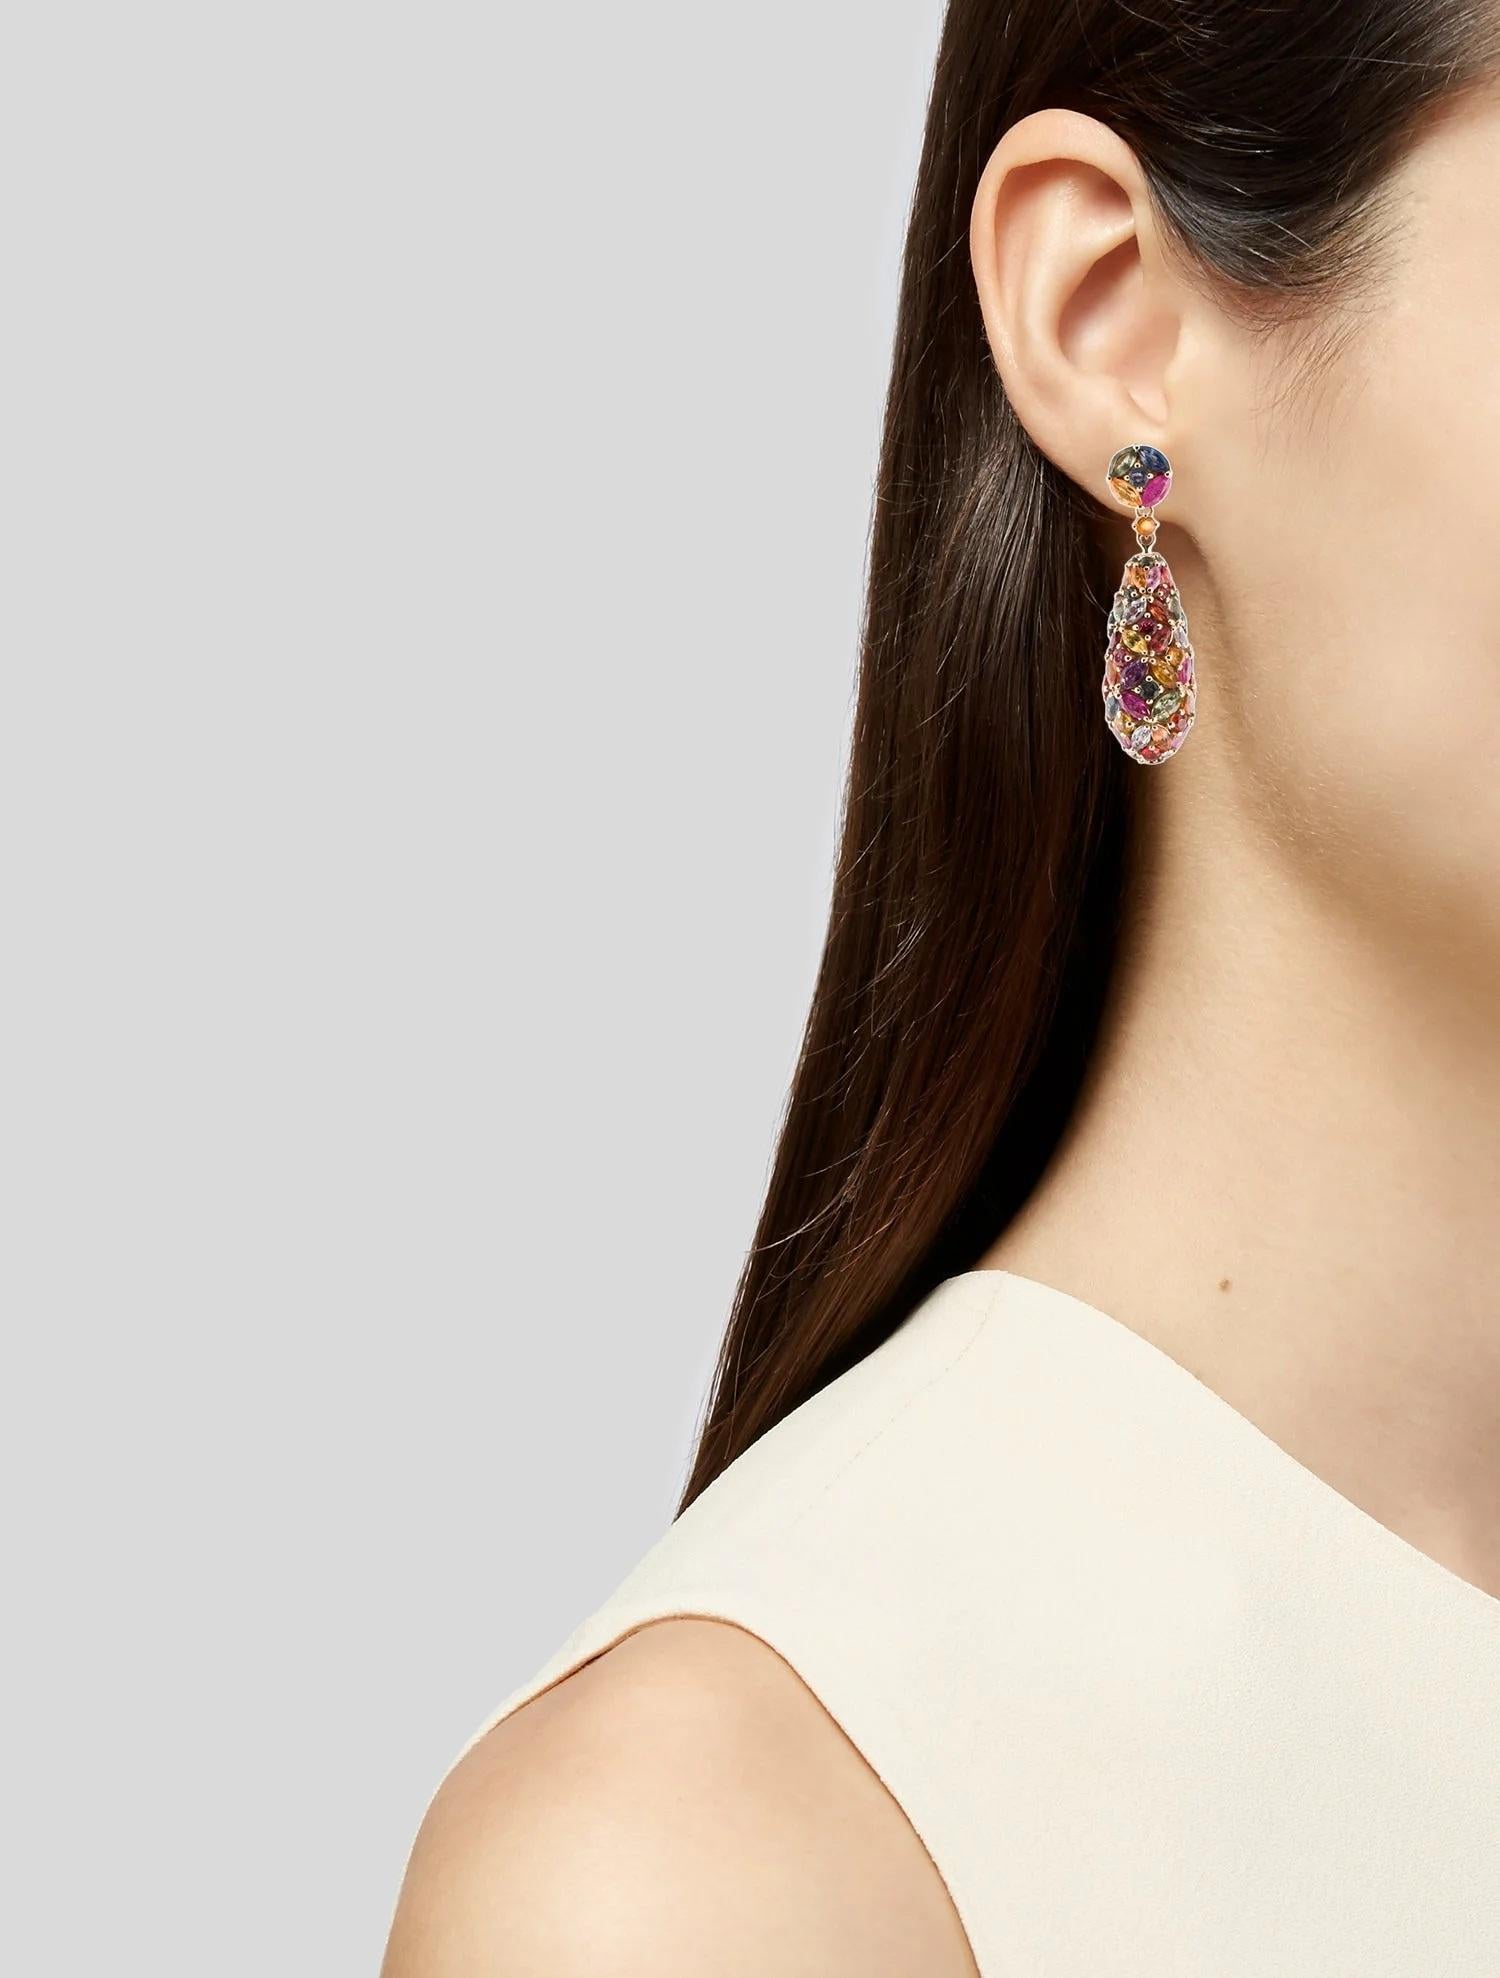 Elevate your look with these stunning 14K yellow gold drop earrings, adorned with a dazzling array of vibrant gemstones. Featuring a total carat weight of 29.63, these earrings showcase marquise and round modified brilliant-cut rubies, orange